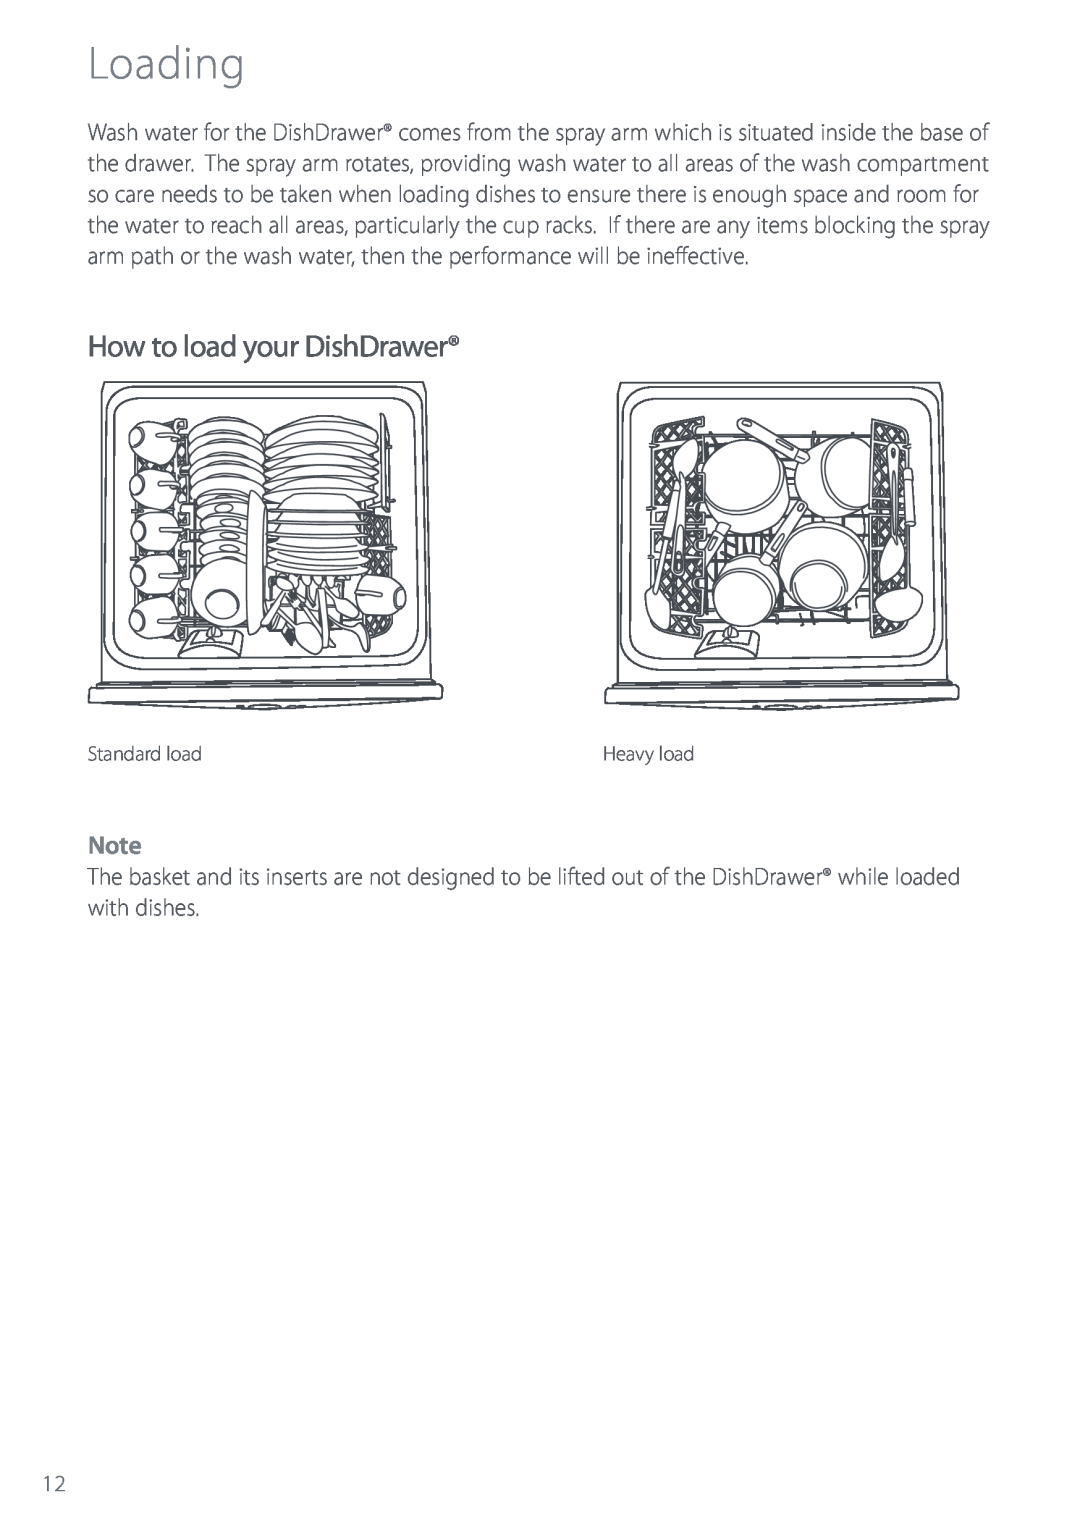 Fisher & Paykel DS603 manual Loading, How to load your DishDrawer 